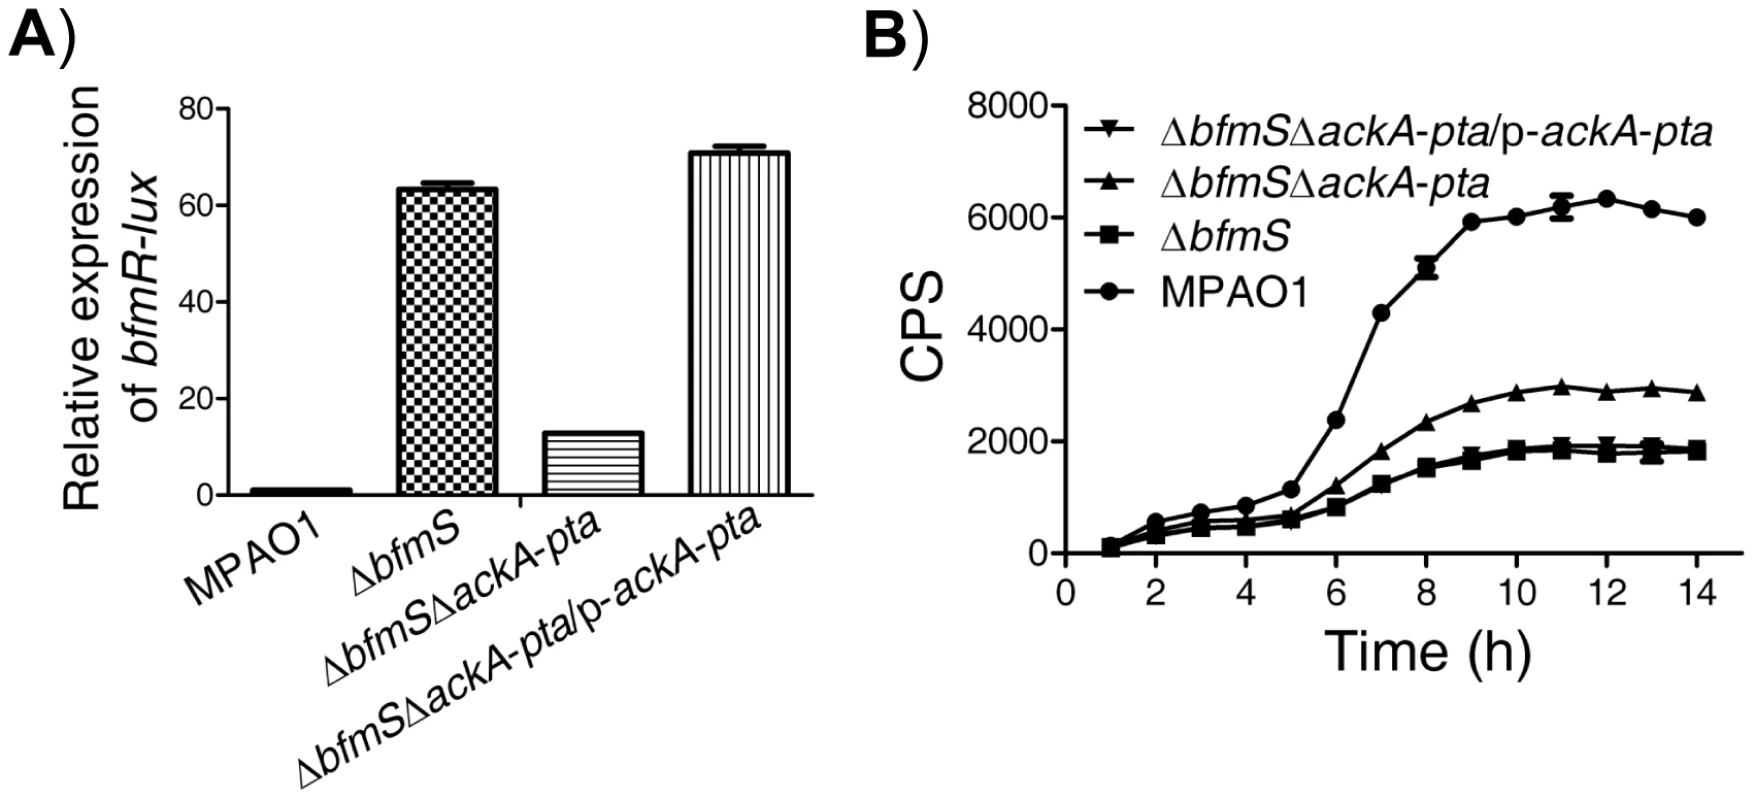 Effect of the Pta-AckA pathway and carbon sources availability on the activation of BfmR in the absence of BfmS.